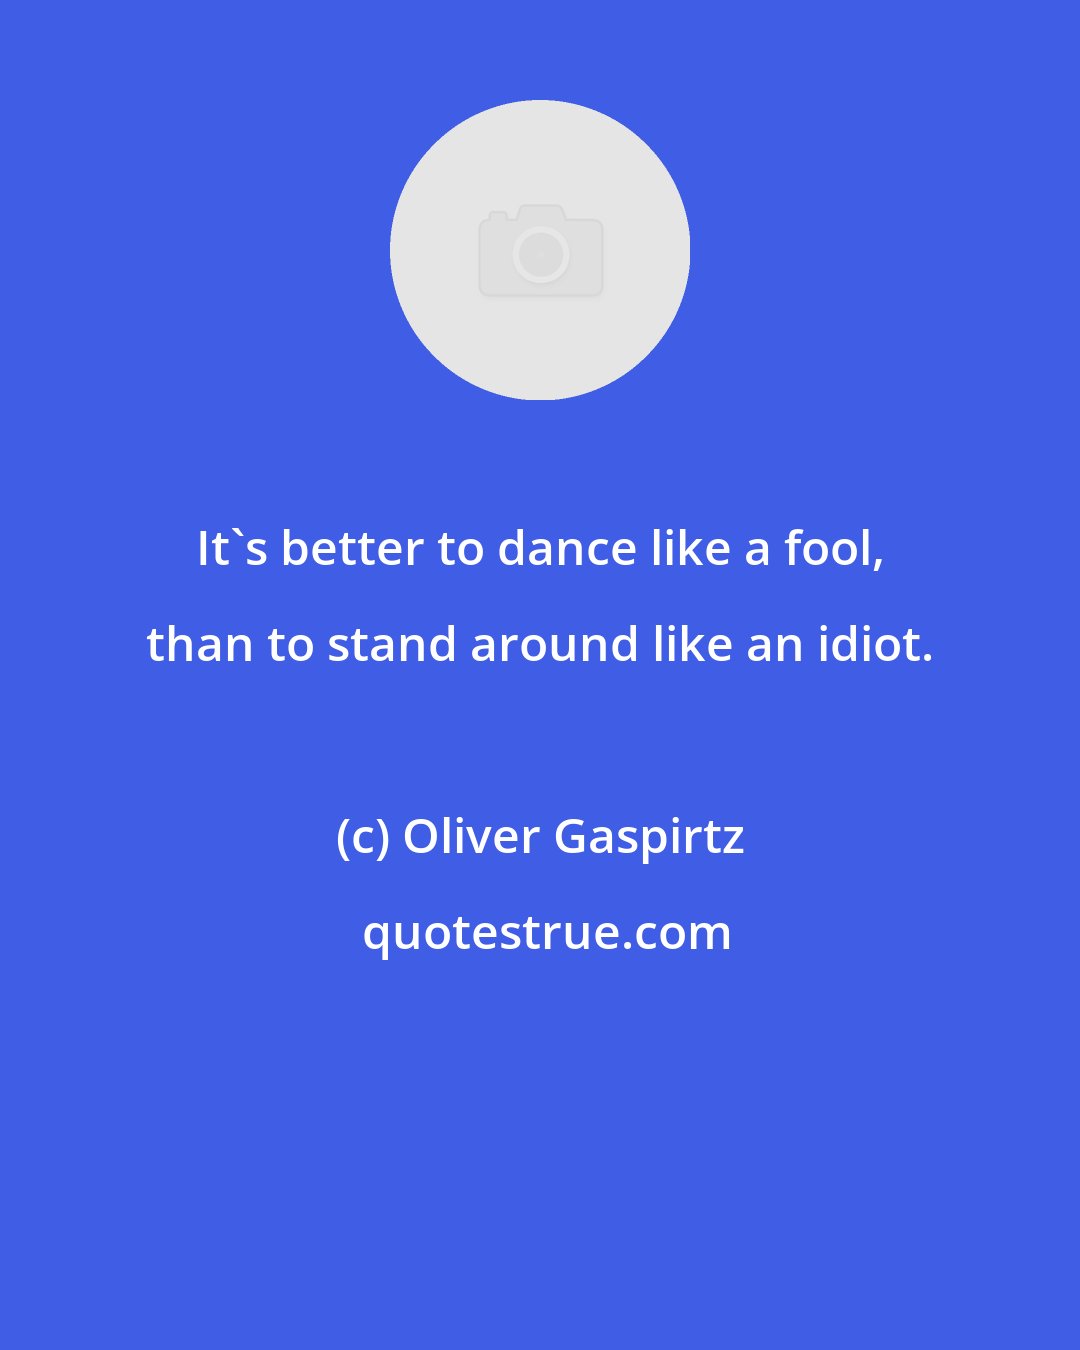 Oliver Gaspirtz: It's better to dance like a fool, than to stand around like an idiot.